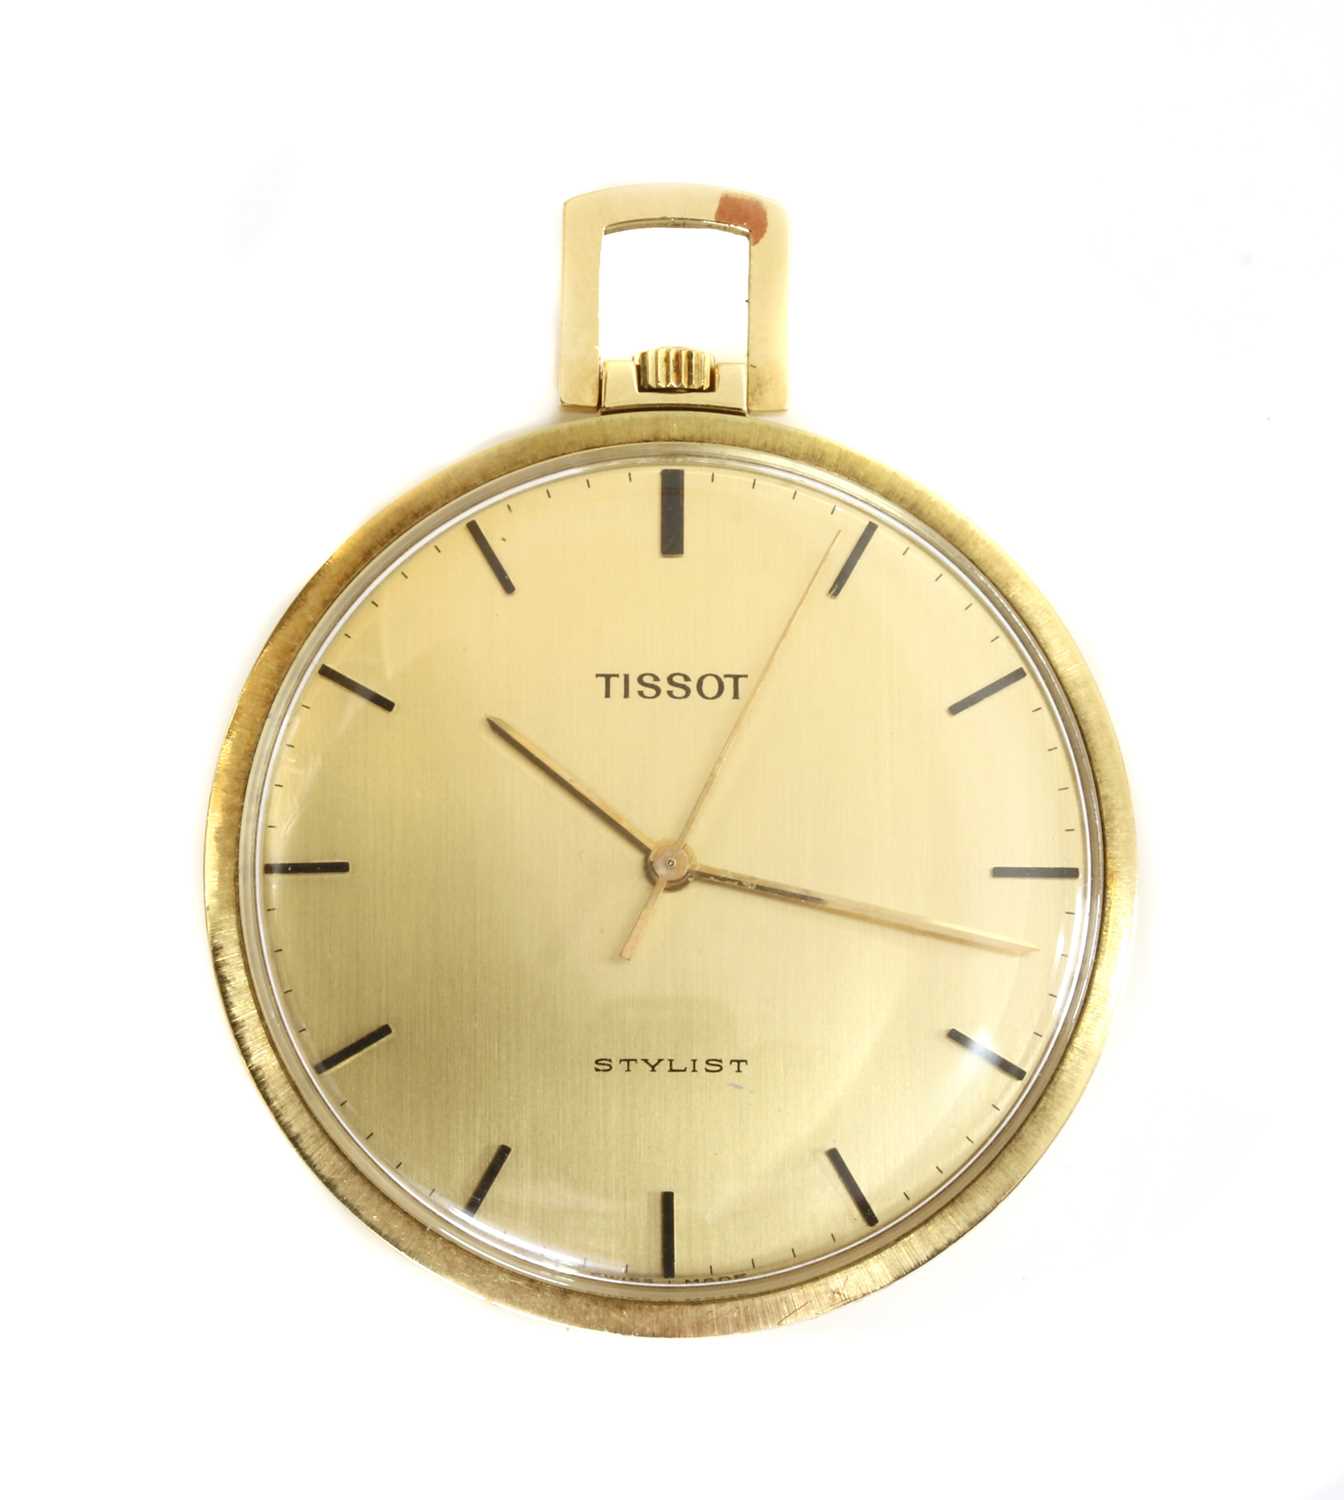 Lot 249 - A 14ct gold Tissot 'Stylist' open-faced